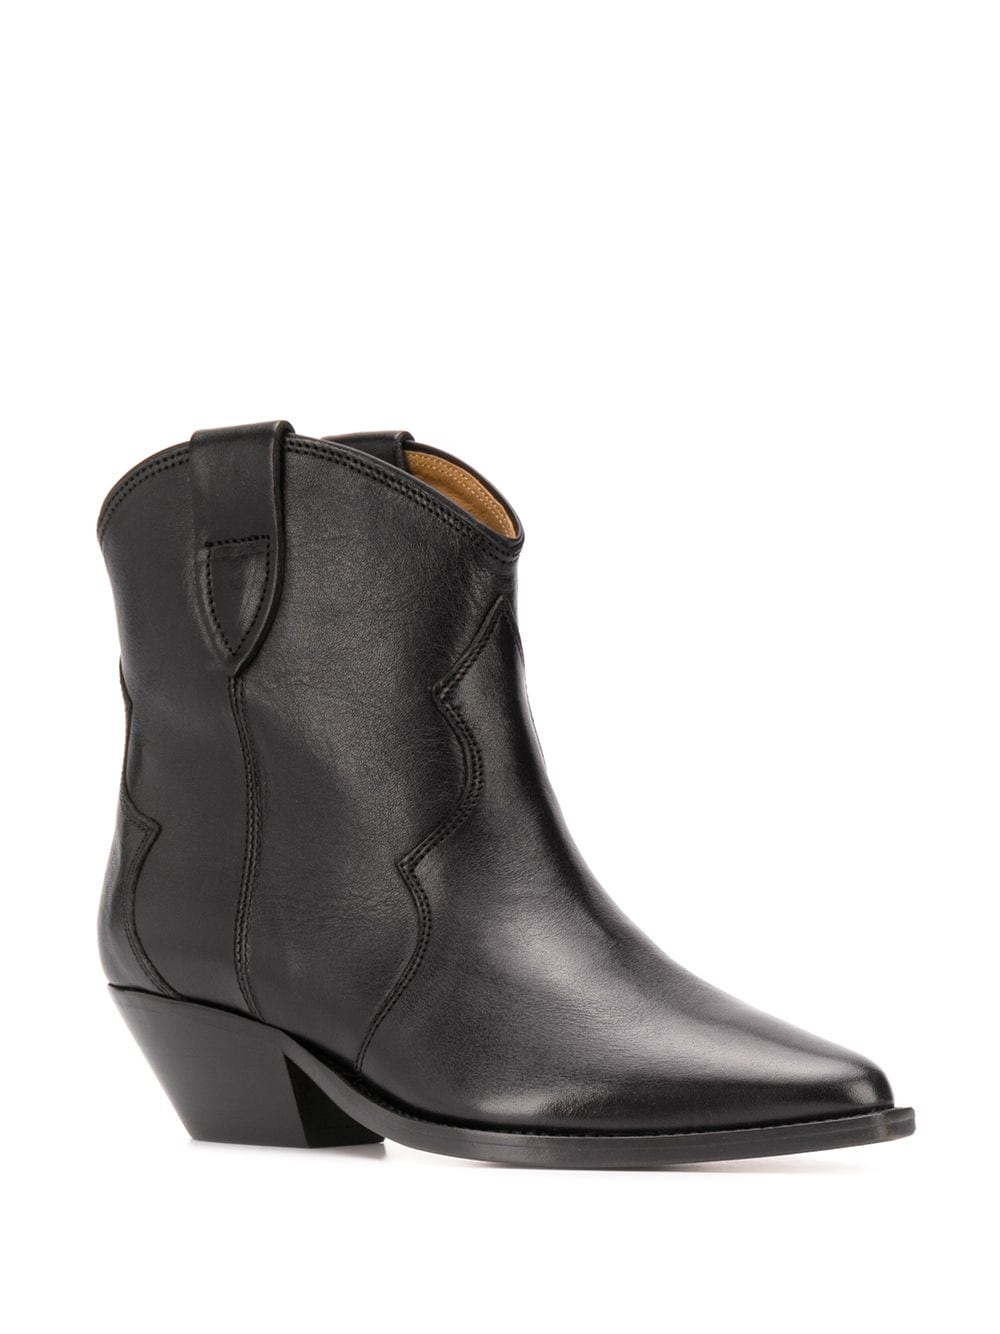 Shop Isabel Marant Dewina cowboy style boots with Express Delivery ...